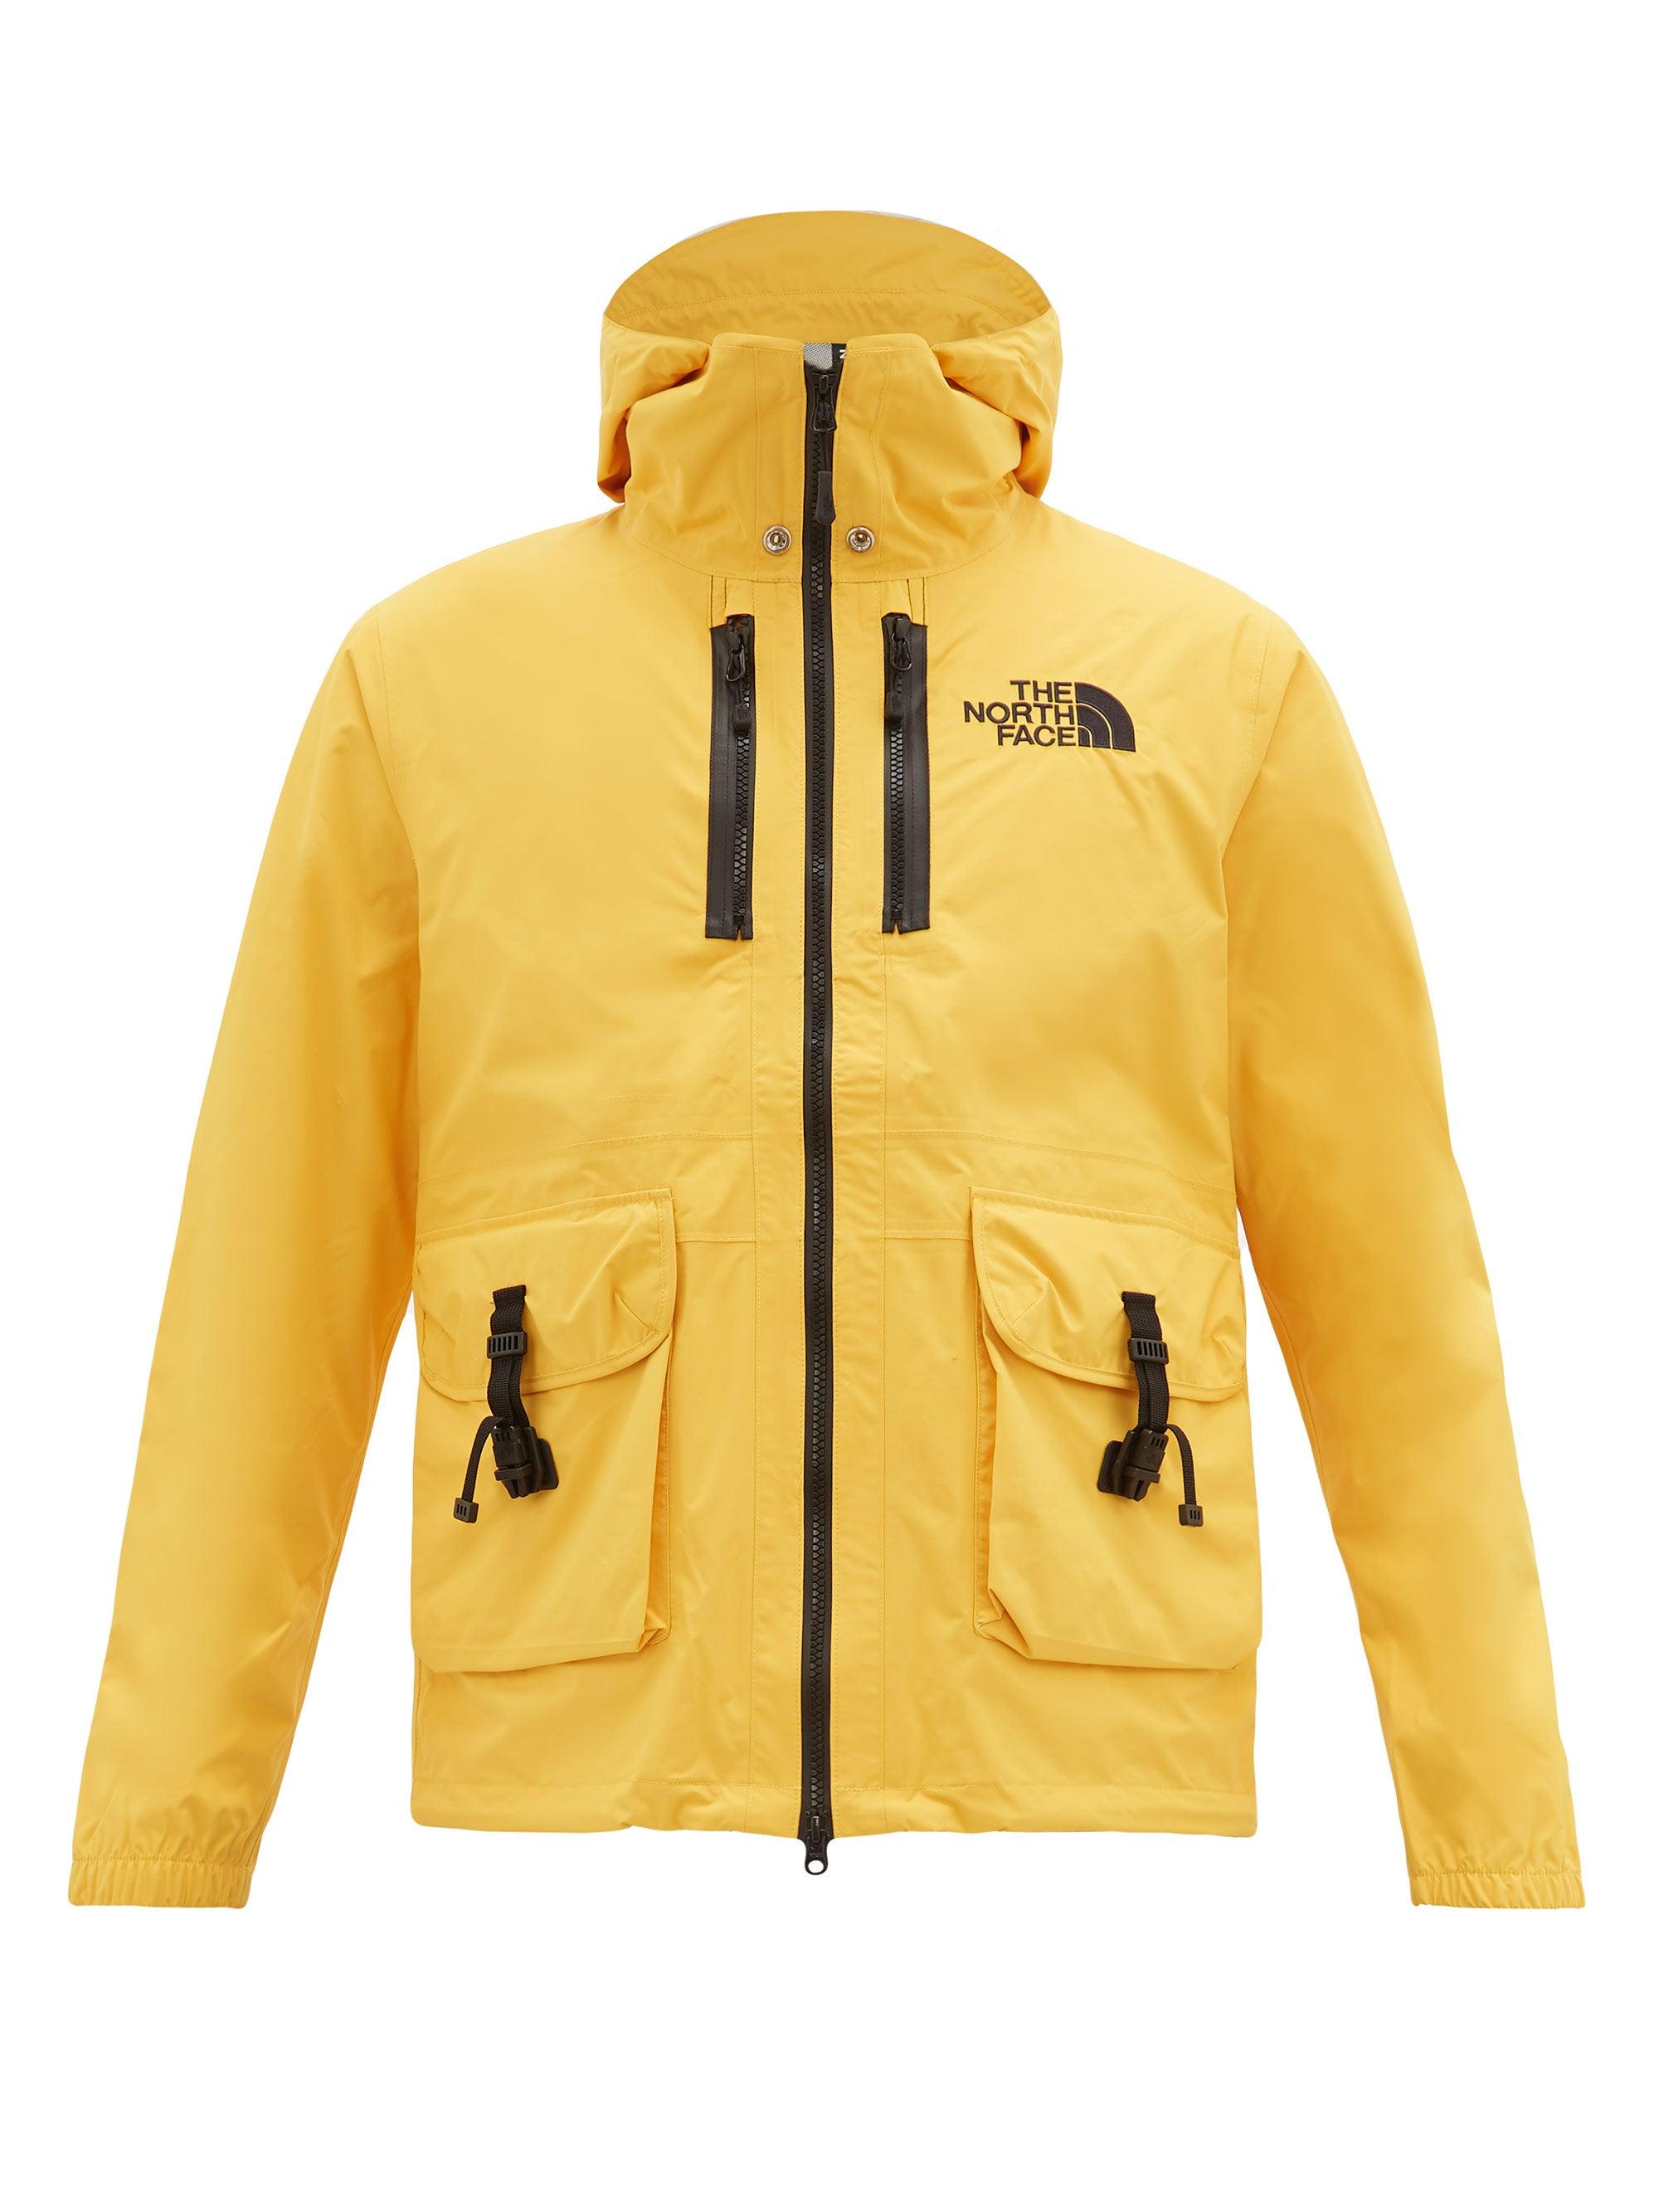 THE NORTH FACE BLACK SERIES X Kazuki Kuraishi Hooded Technical Jacket in  Yellow for Men | Lyst